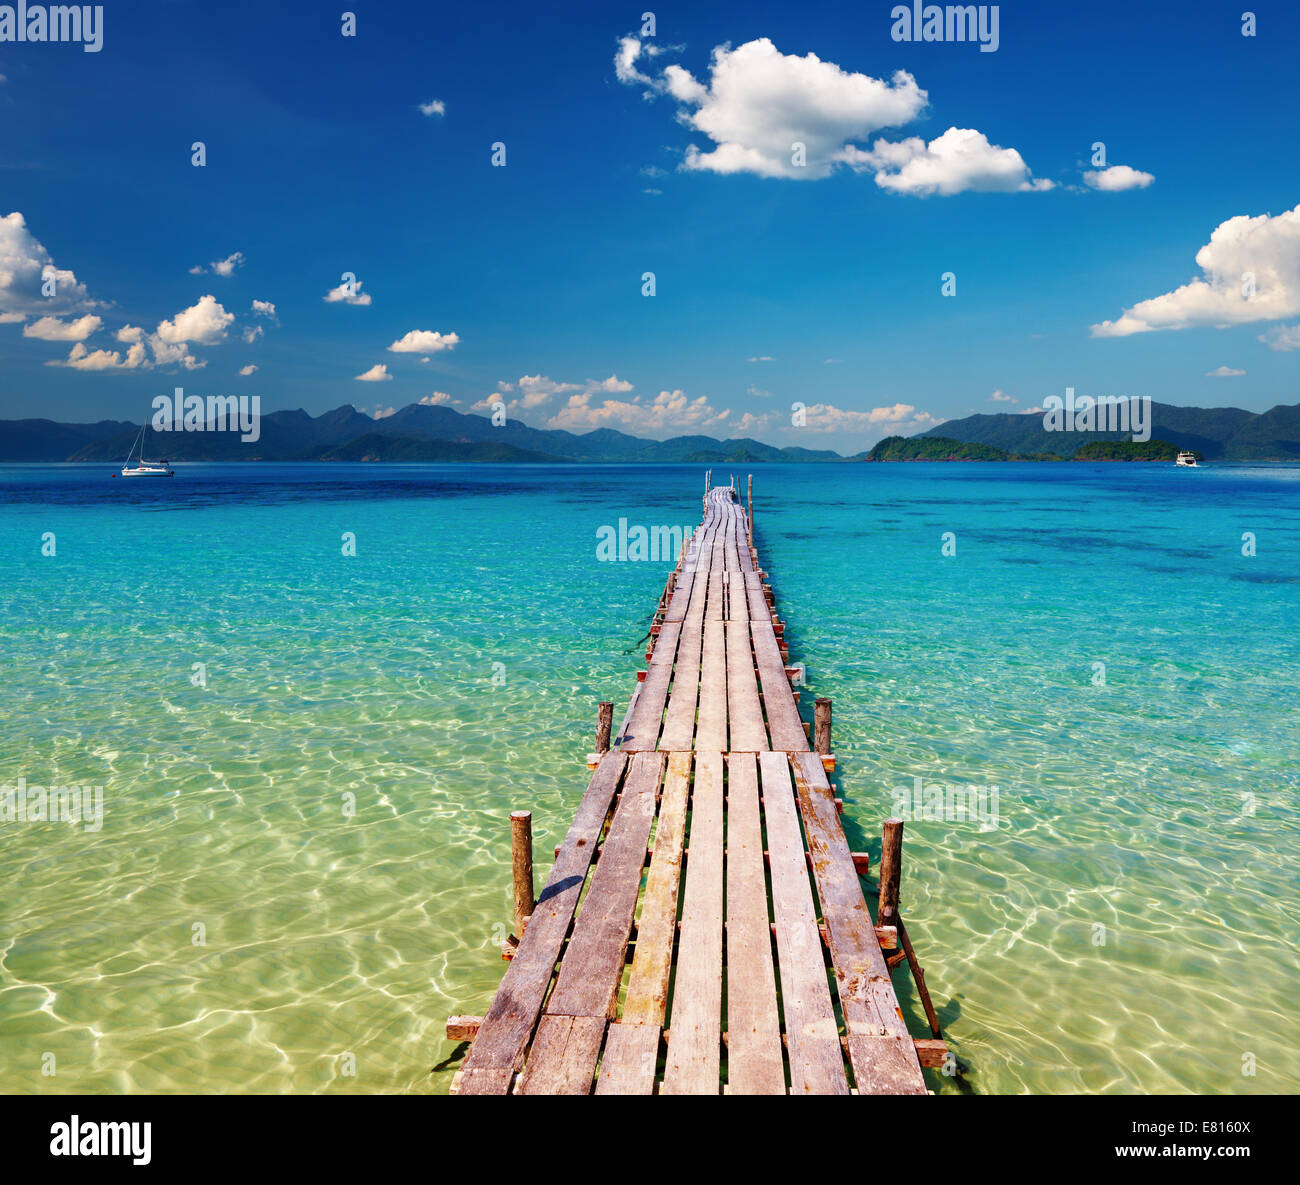 Wooden pier in tropical paradise, Thailand Stock Photo